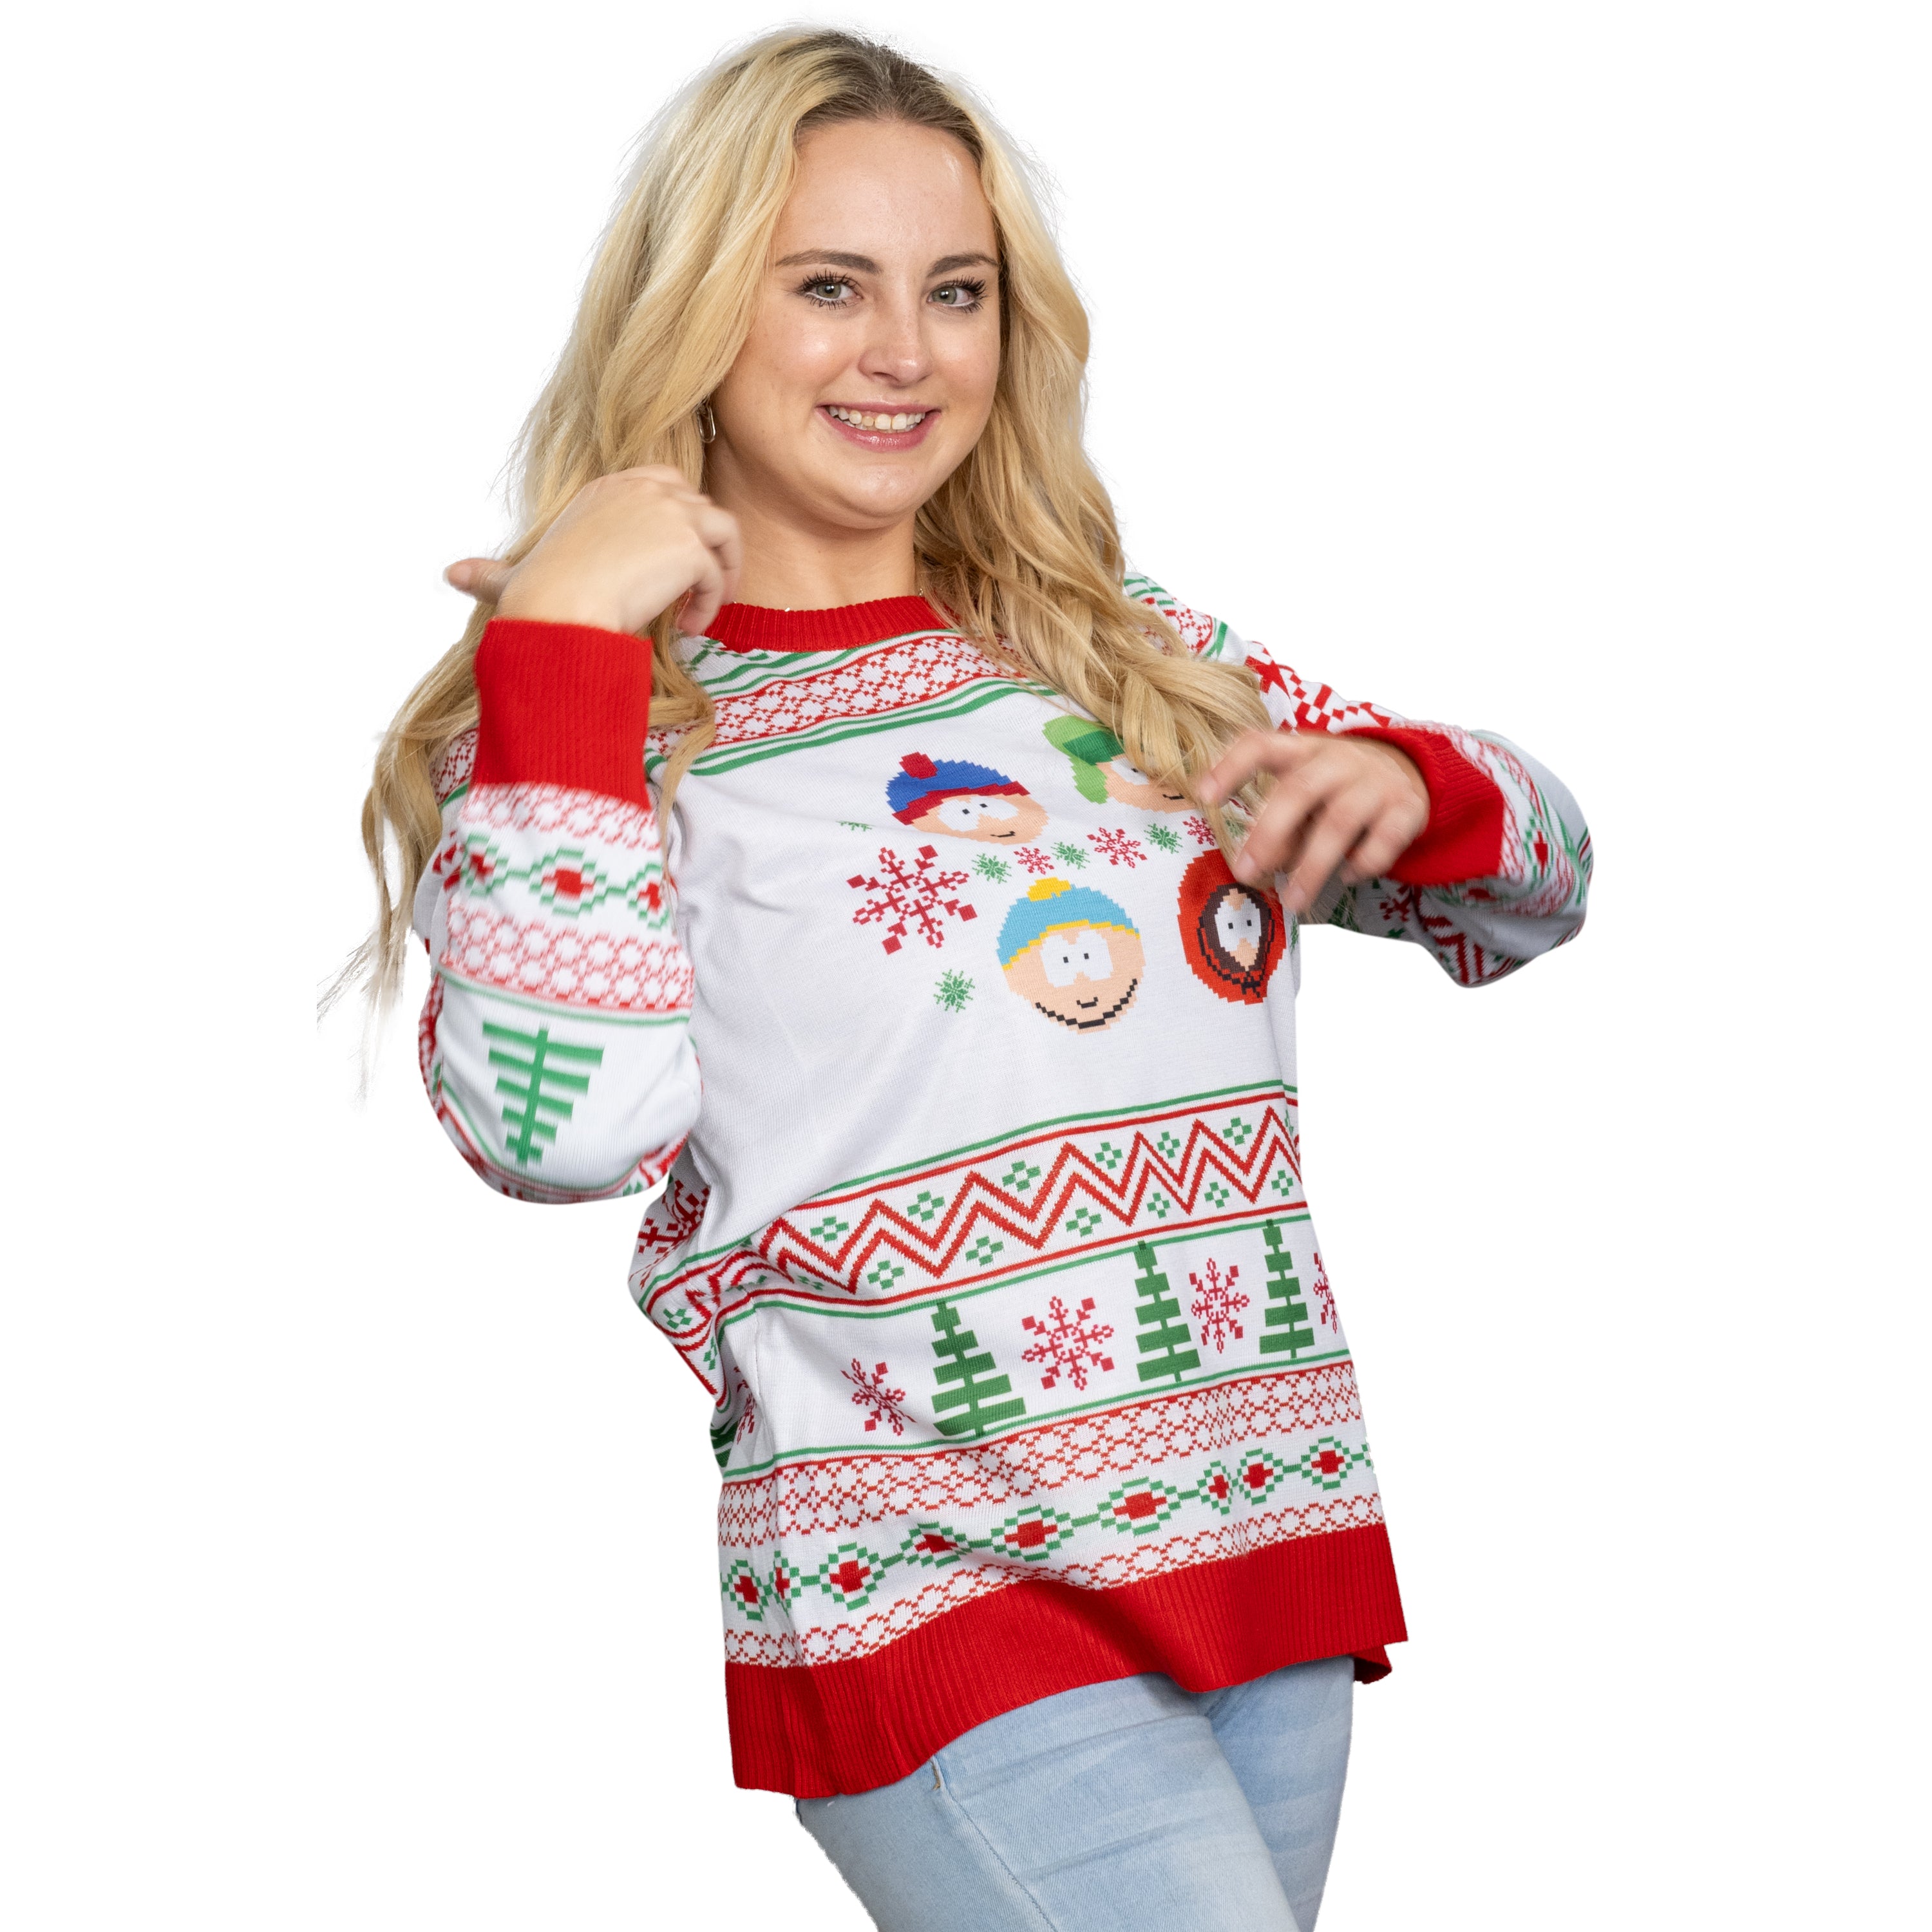 Best Friends Fair Isle Faces South Park Ugly Christmas Sweater